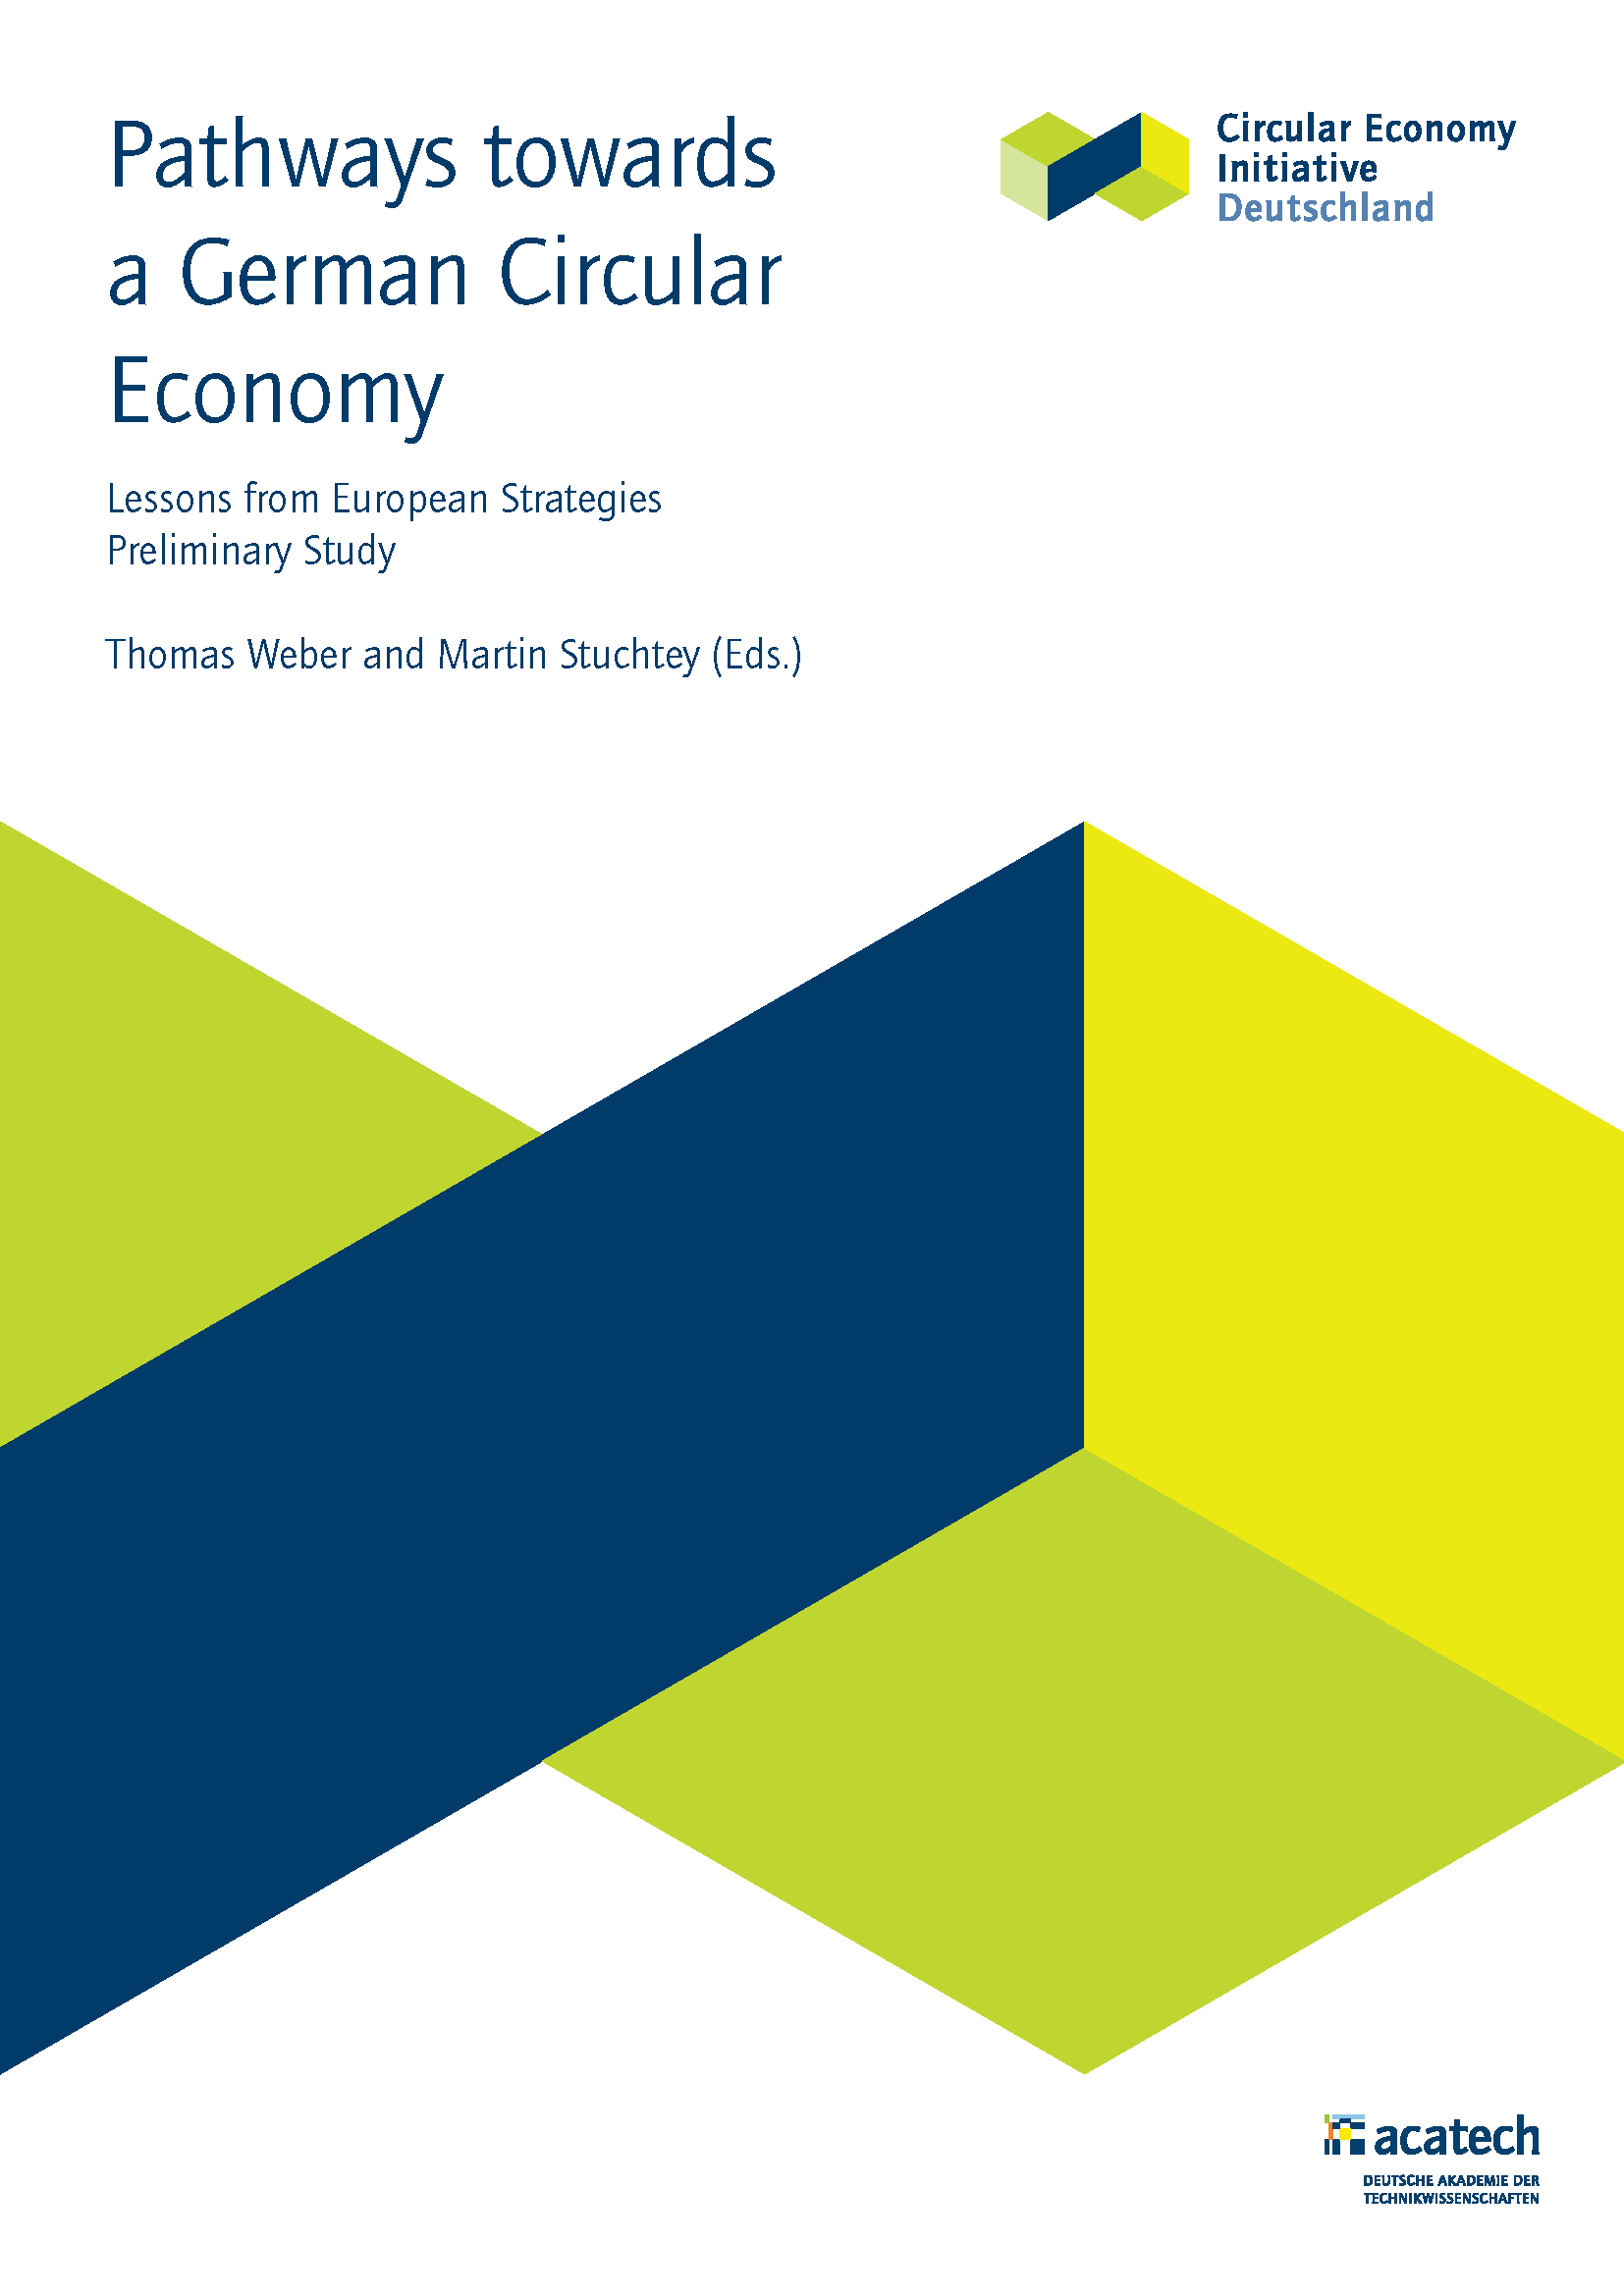 Pathways towards a German Circular Economy - Lessons from European Strategies (Preliminary Study)